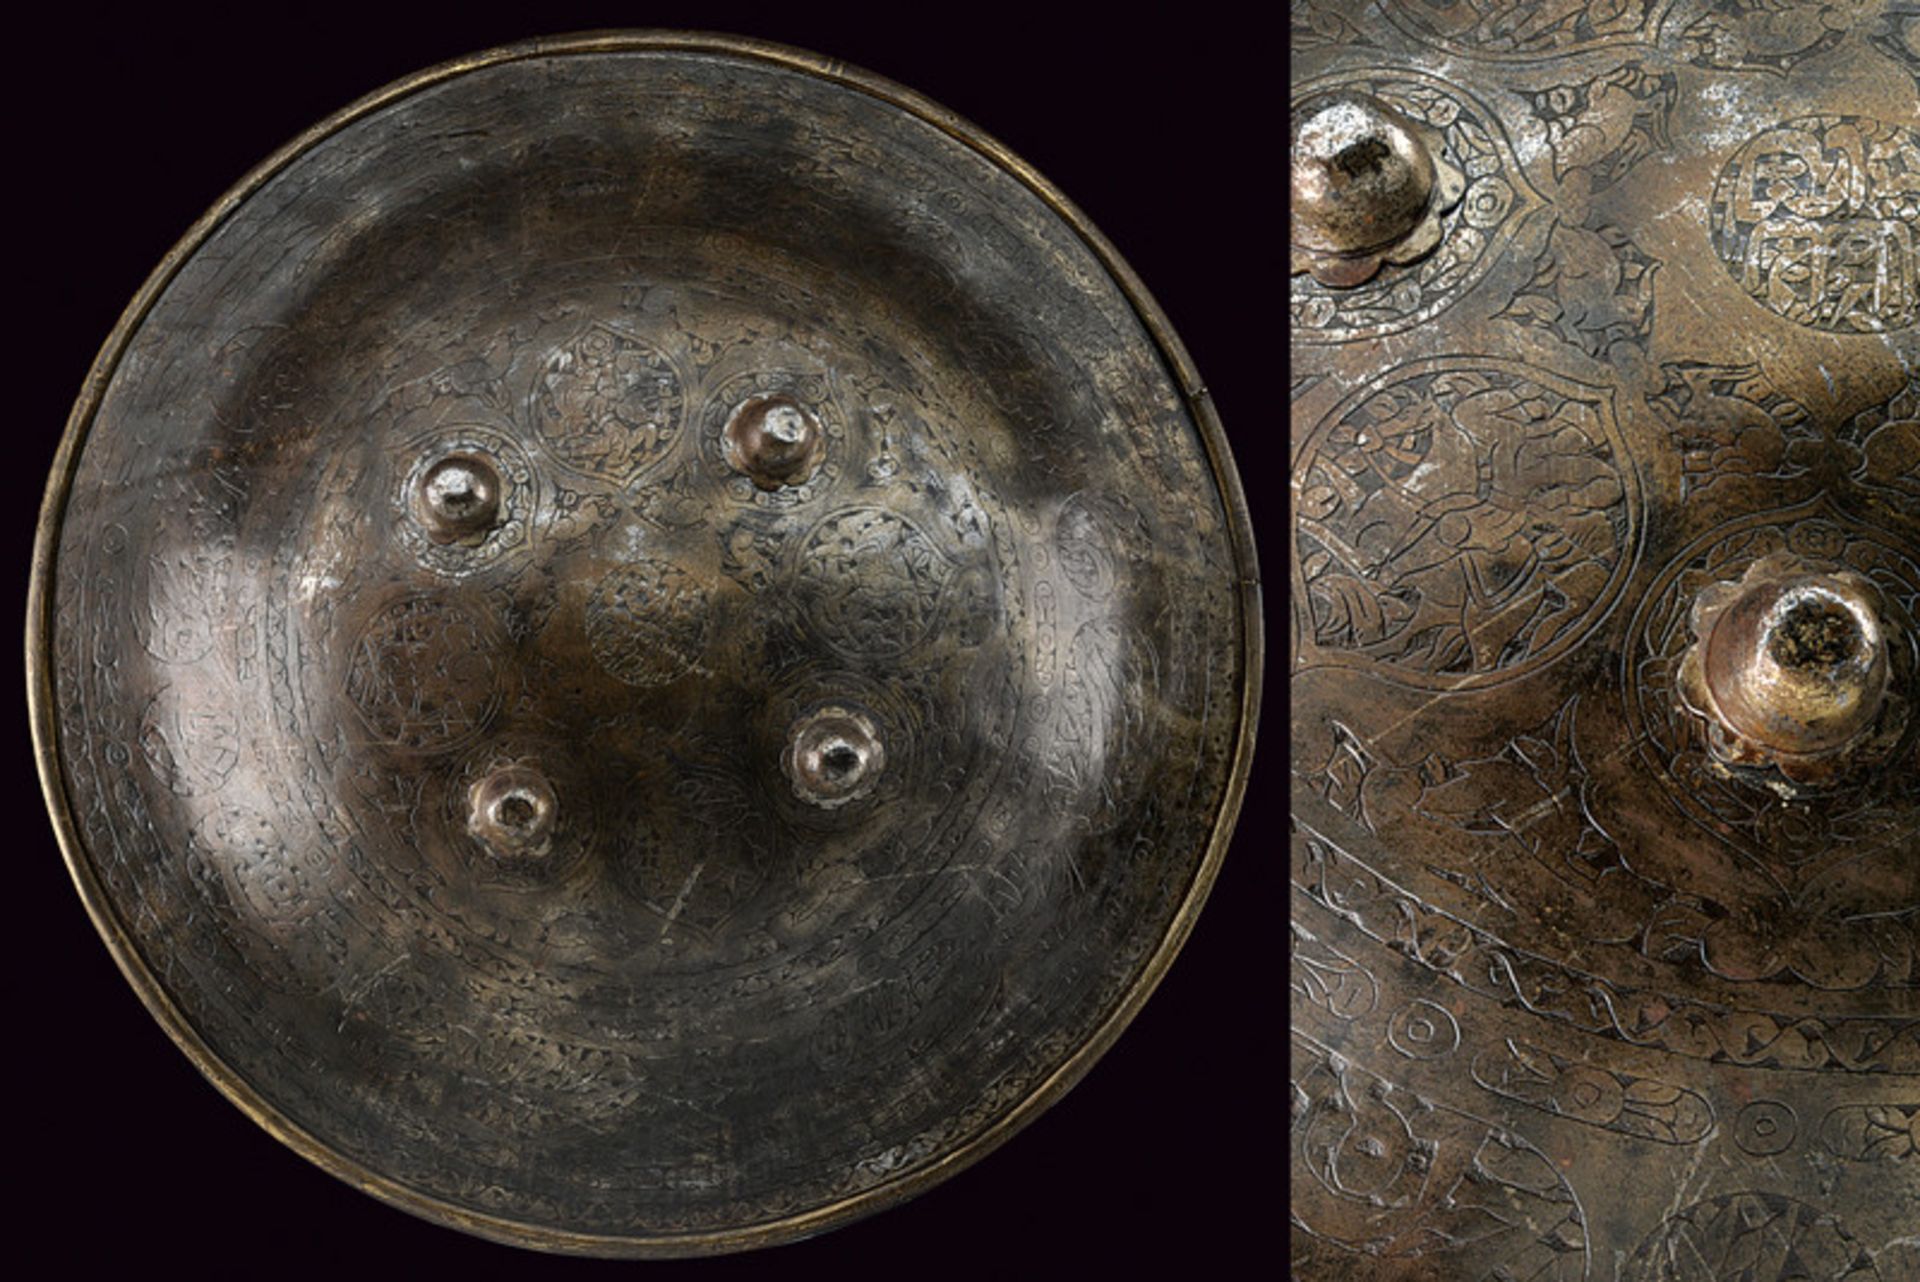 A dhal dating: 19th Century provenance: India Circular, convex shield with four studs and